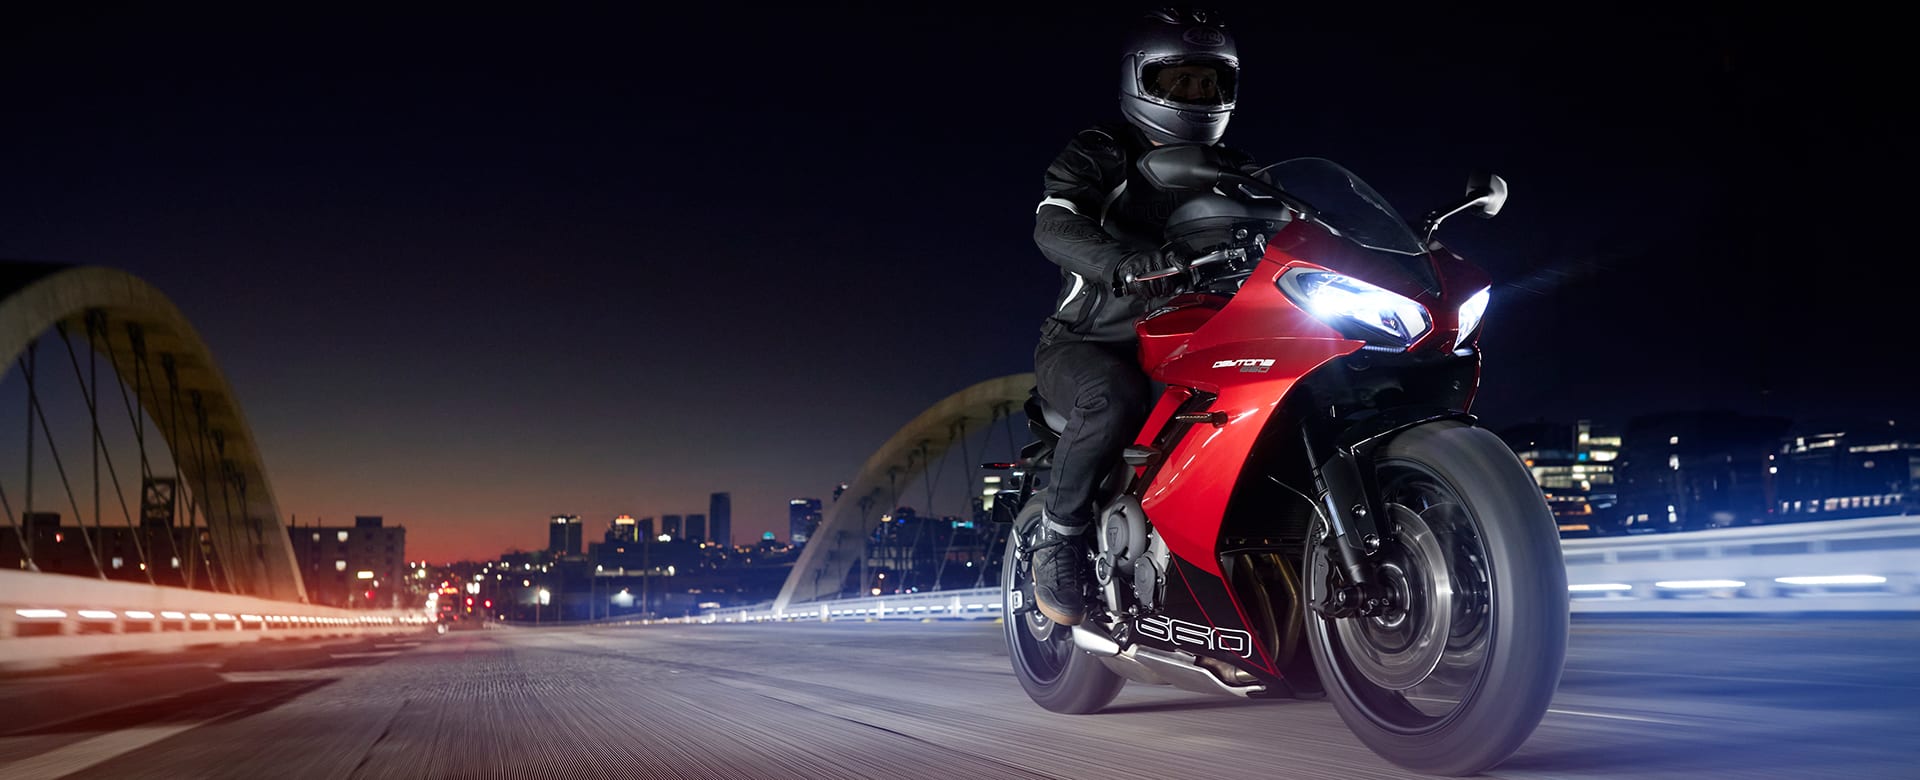 Triumph Daytona 660 in carnival red and sapphire black riding through city at night